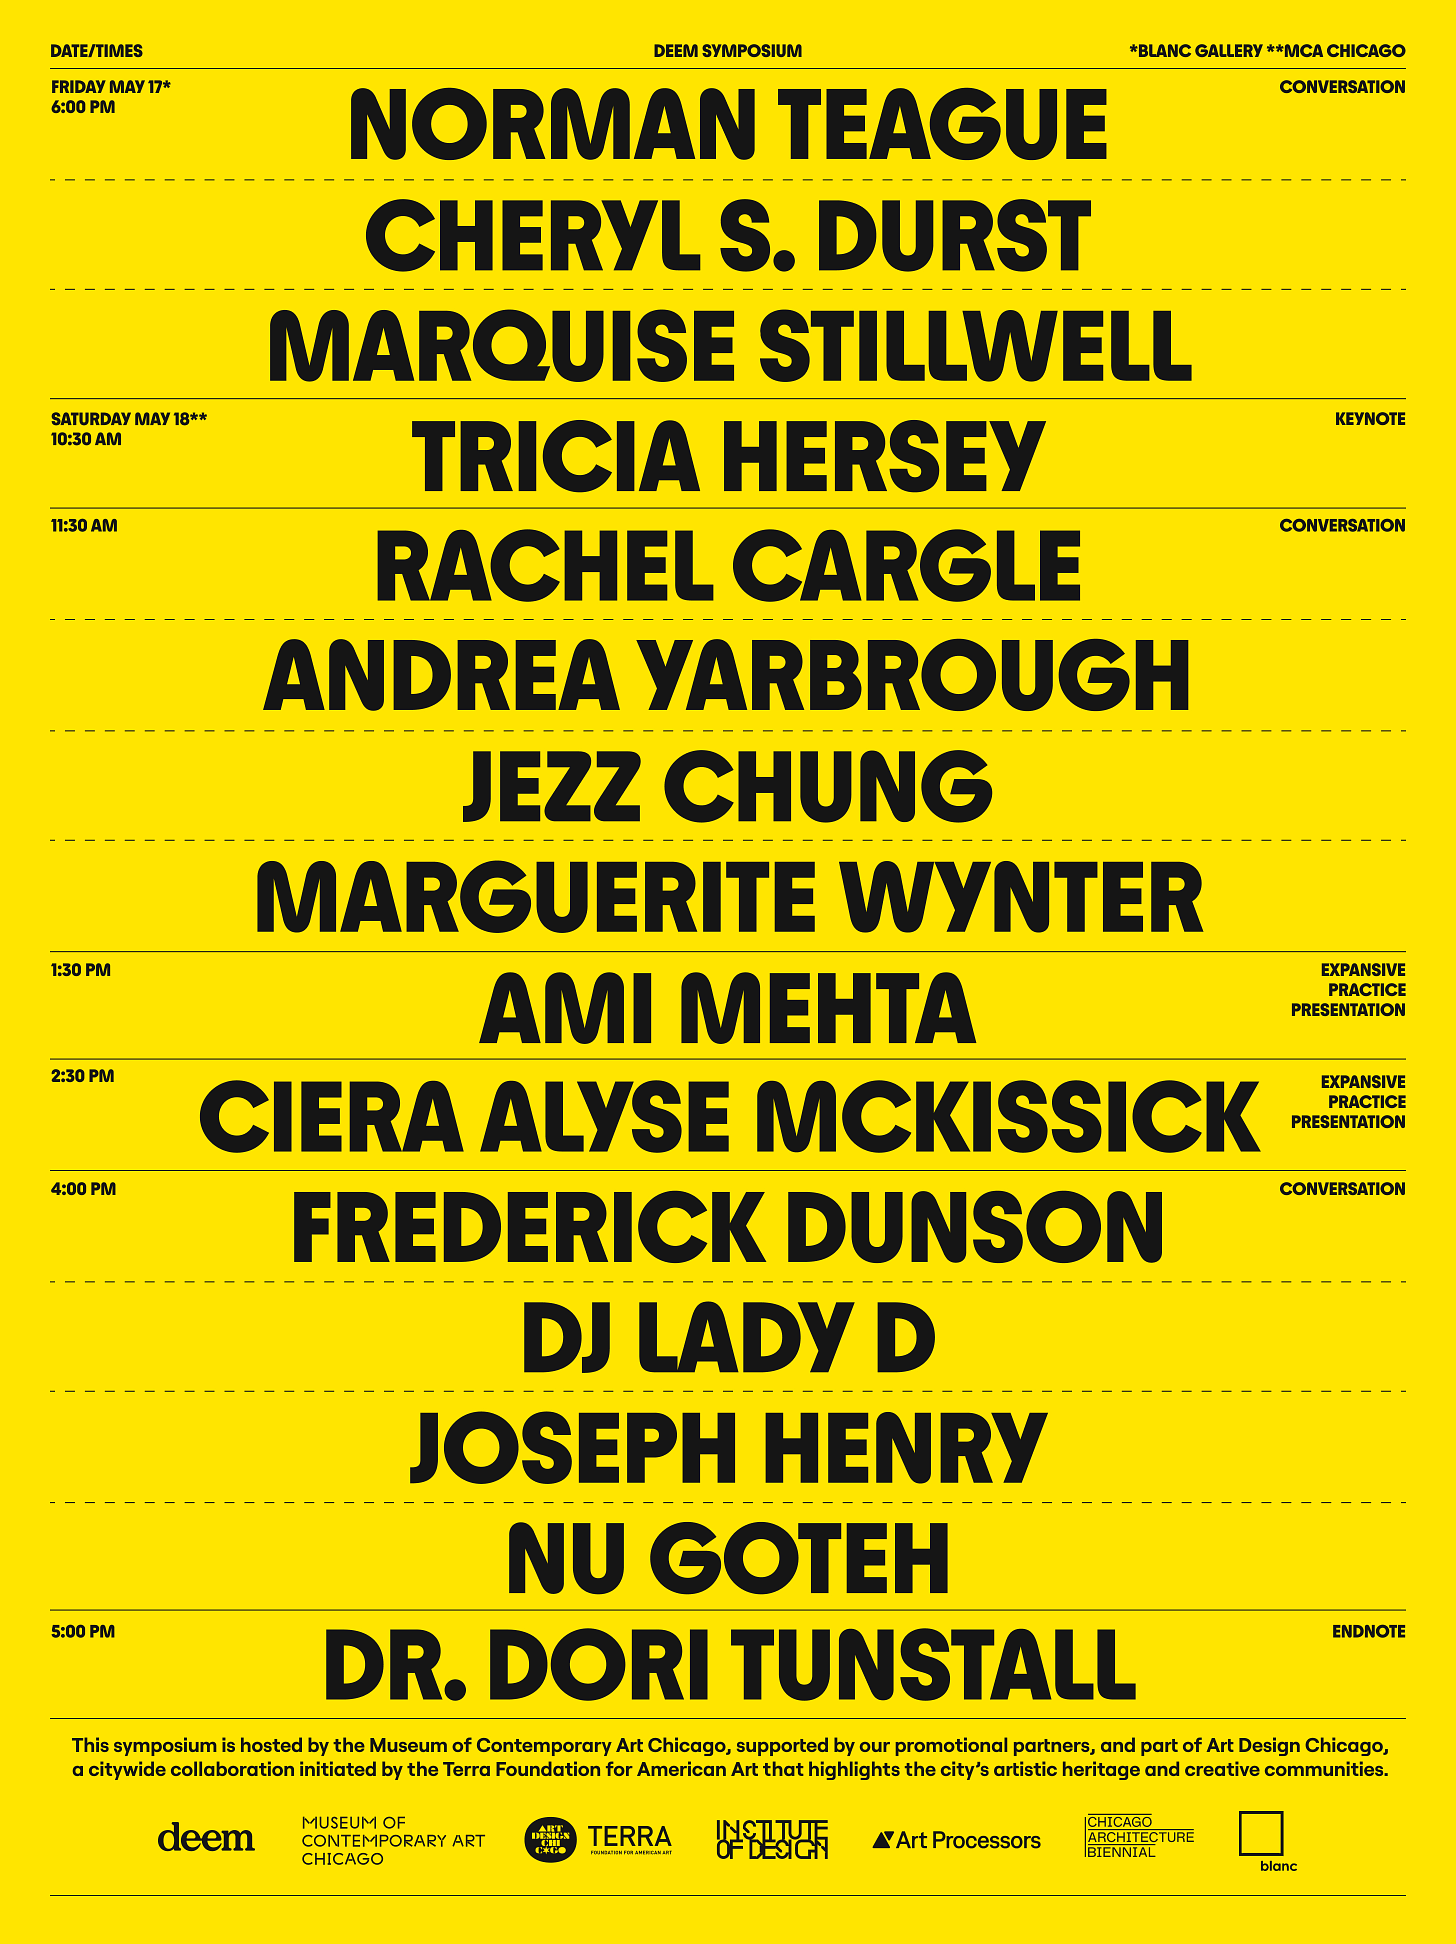 Black text on a yellow background that announces speaker names at the Deem Symposium, including: Norman Teague, Cheryl S. Durst, Marquise Stillwell, Tricia Hersey, Rachel Cargle, Andrea Yarbrough, Jezz Chung, Maguerite Wynter, Ami Mehta, Ciera Alyse McKissick, Frederick Dunson, DJ Lady D, Joseph Henry, Nu Goteh, Dori Tunstall. 